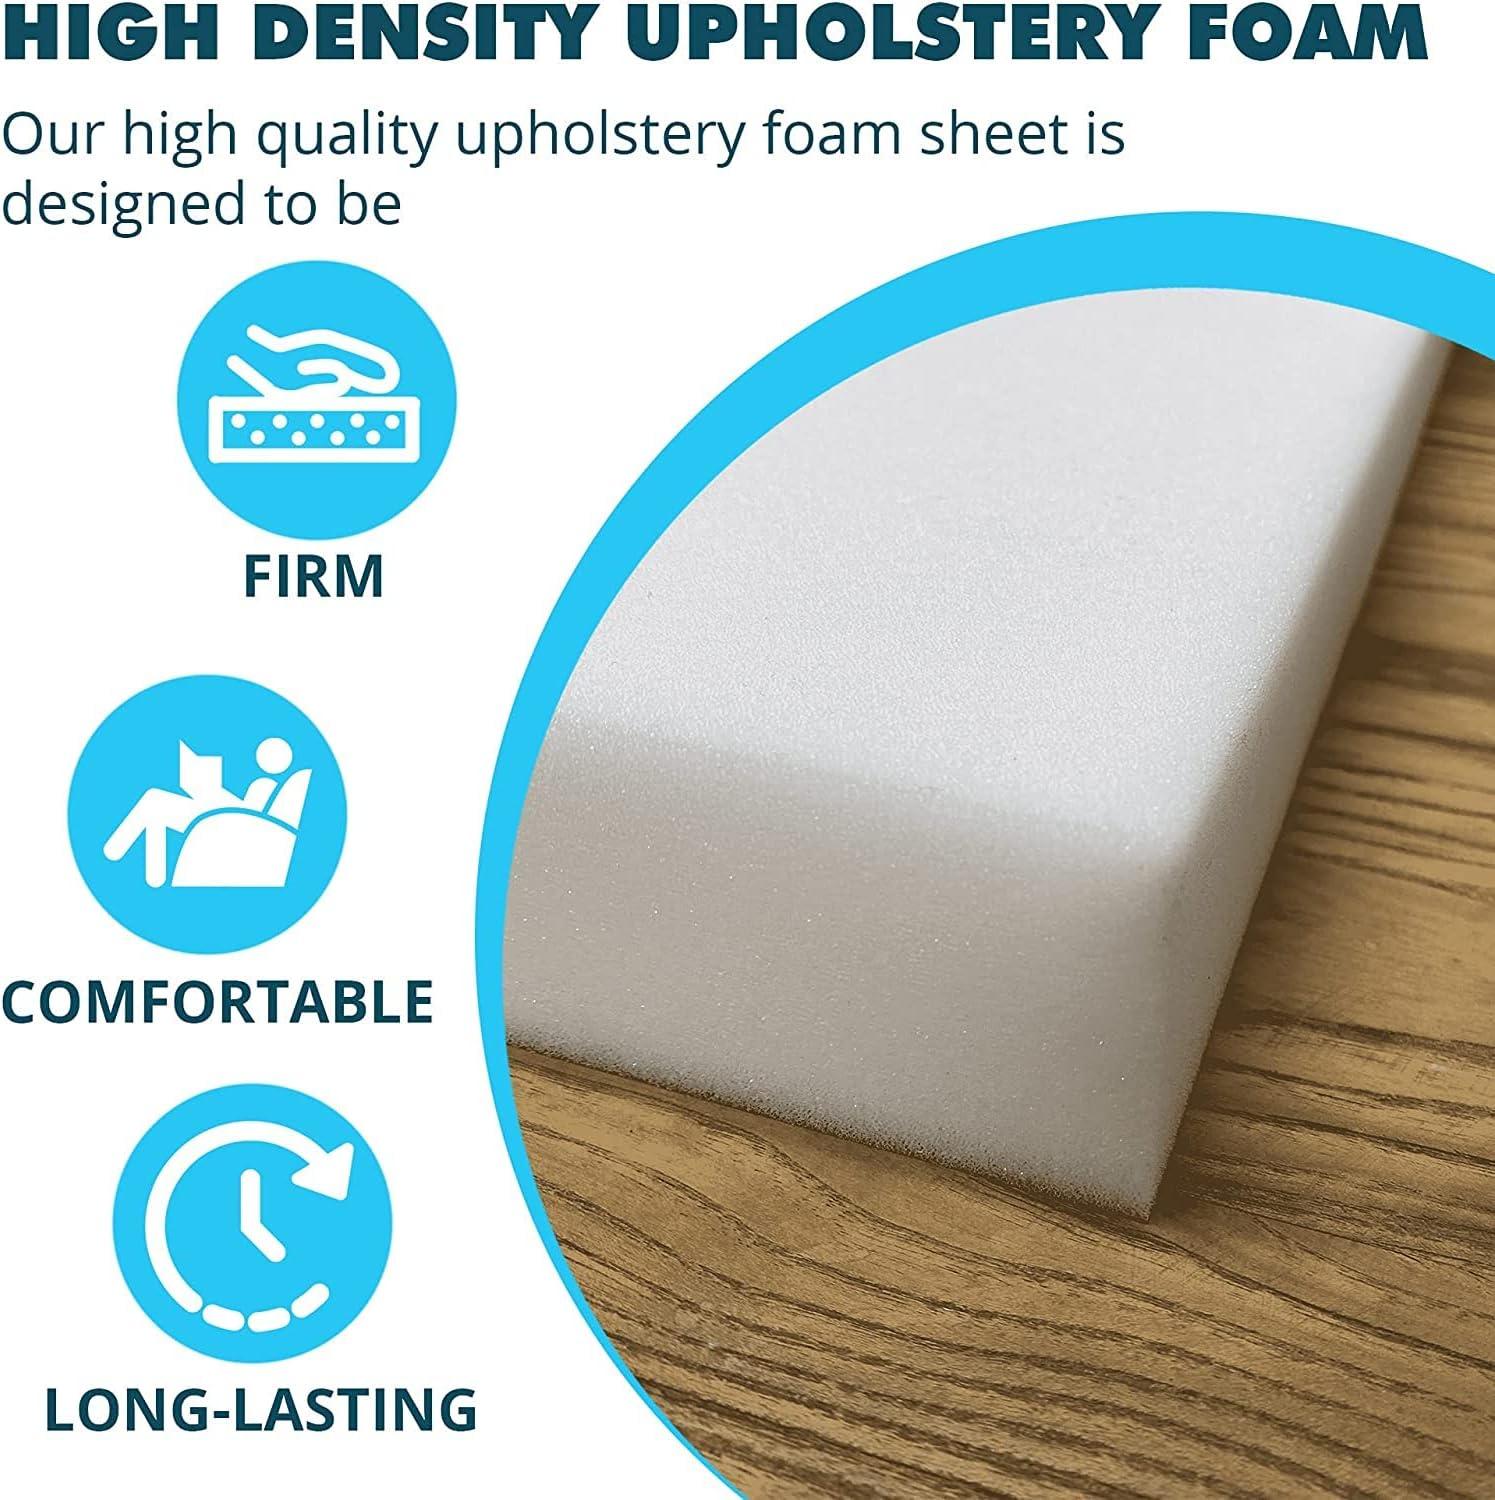 Foamma 2 x 24 x 48 High Density Upholstery Foam Padding, Thick-Custom Pillow, Chair, and Couch Cushion Replacement Foam, Craft Foam Upholstery